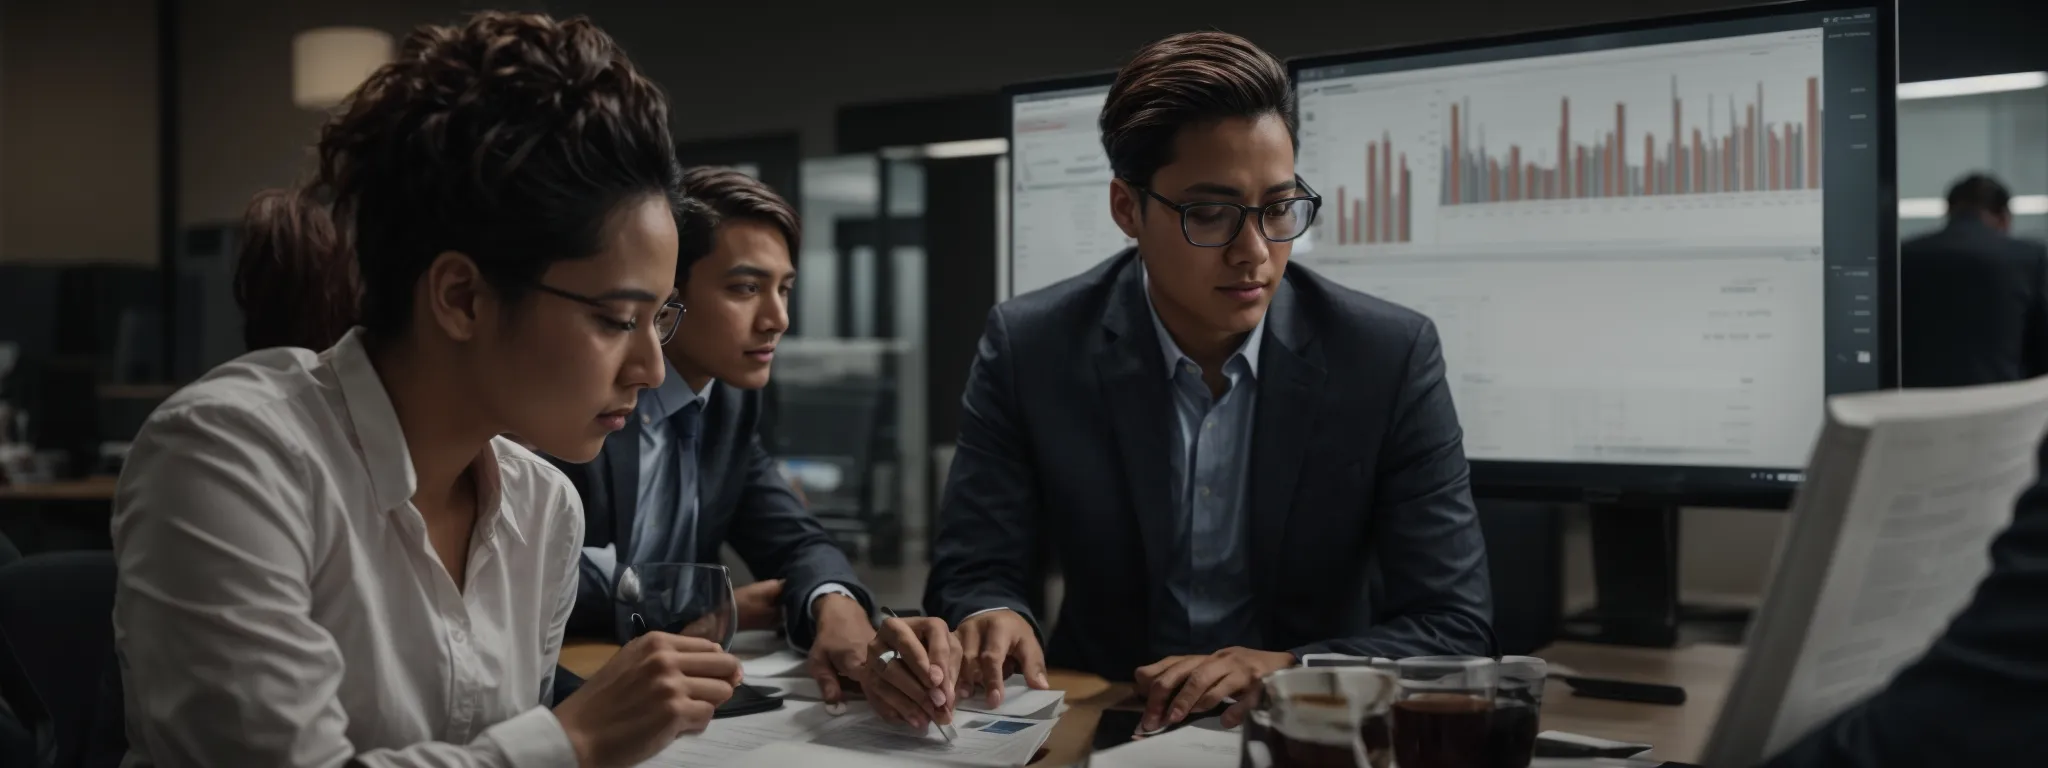 two professionals, one with a financial chart and the other with a digital marketing report, engaged in a focused discussion in an office environment.